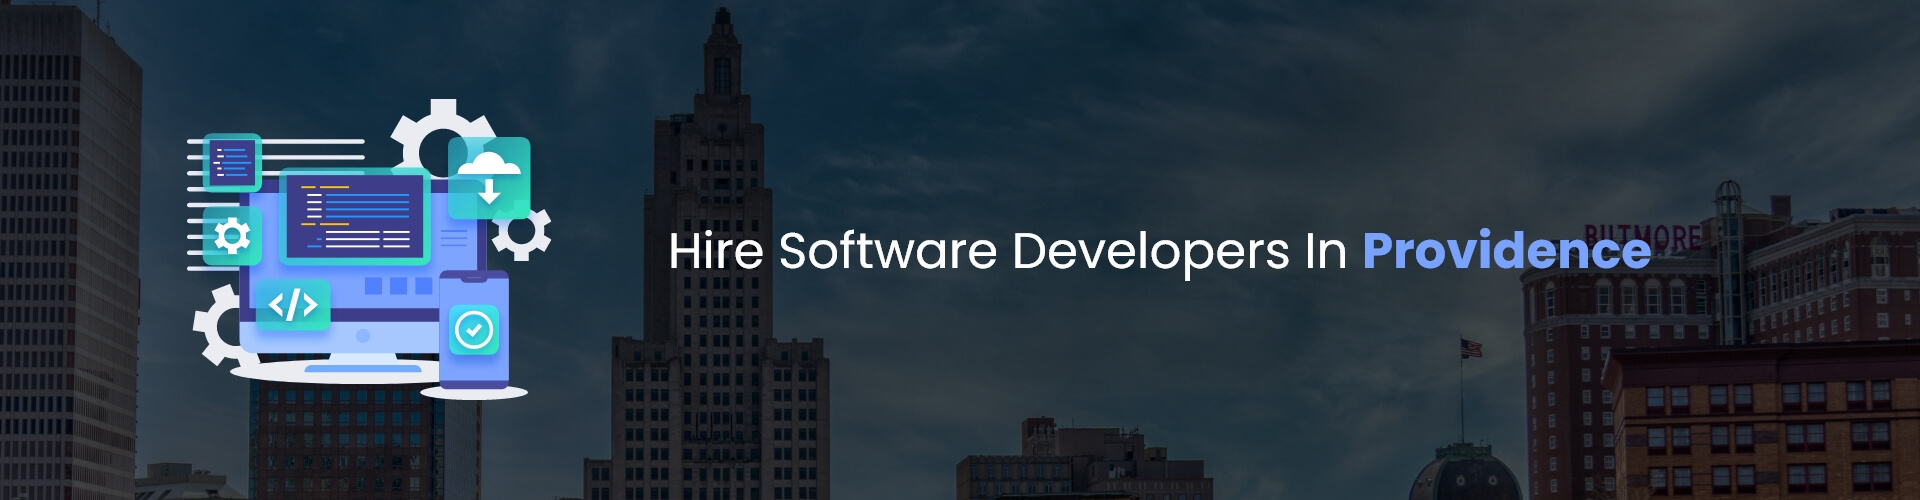 hire software developers in providence